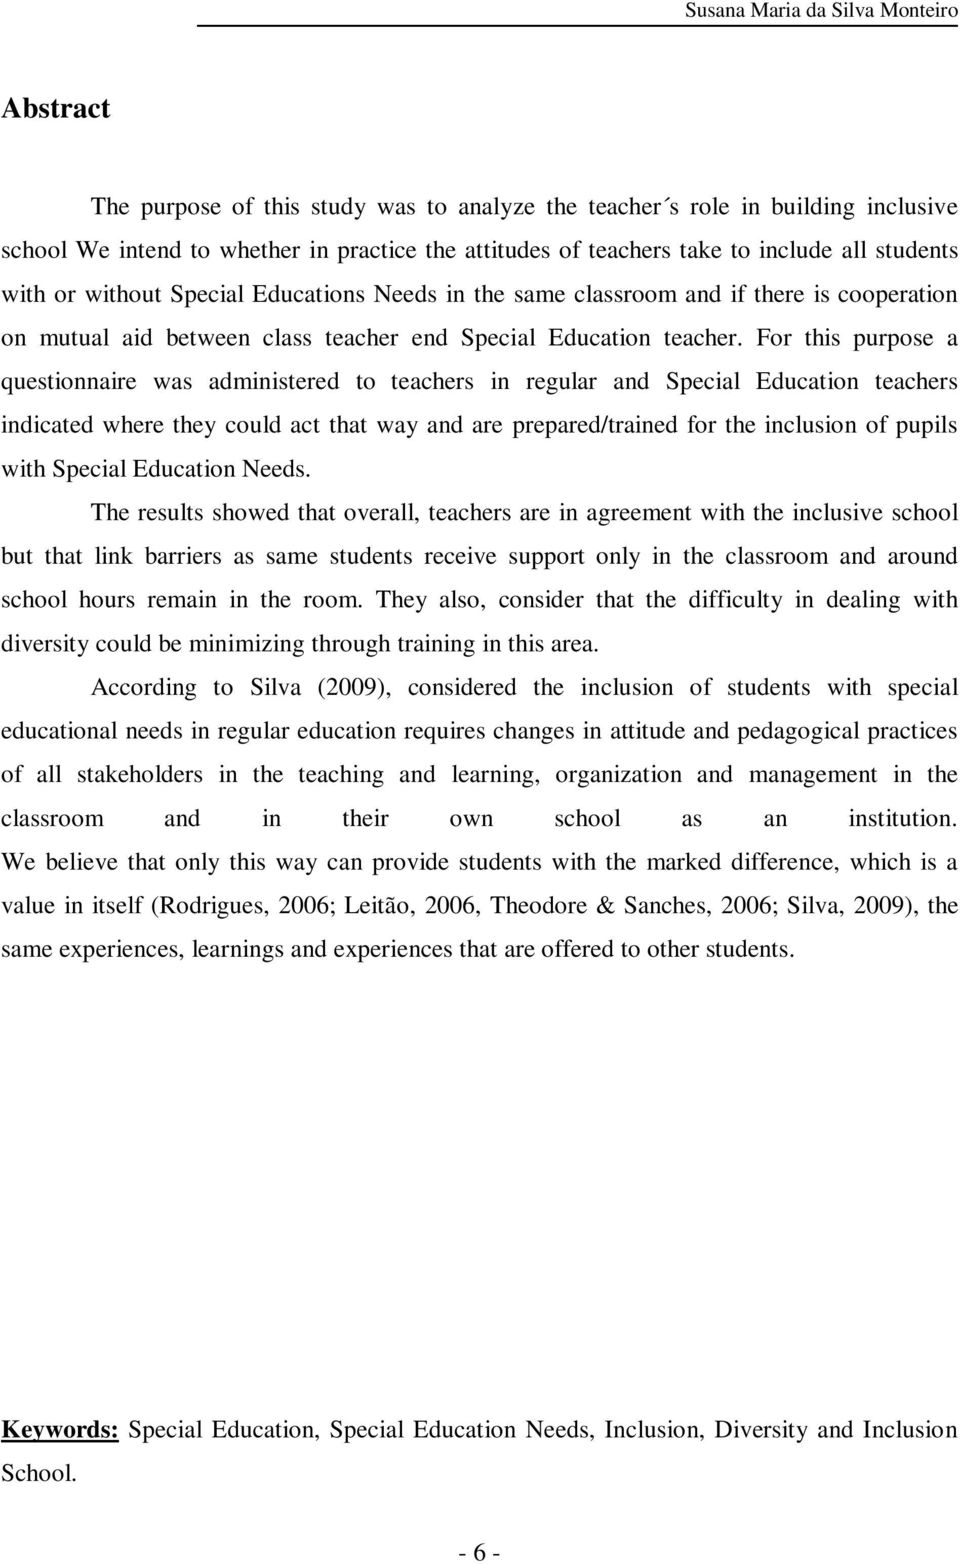 For this purpose a questionnaire was administered to teachers in regular and Special Education teachers indicated where they could act that way and are prepared/trained for the inclusion of pupils